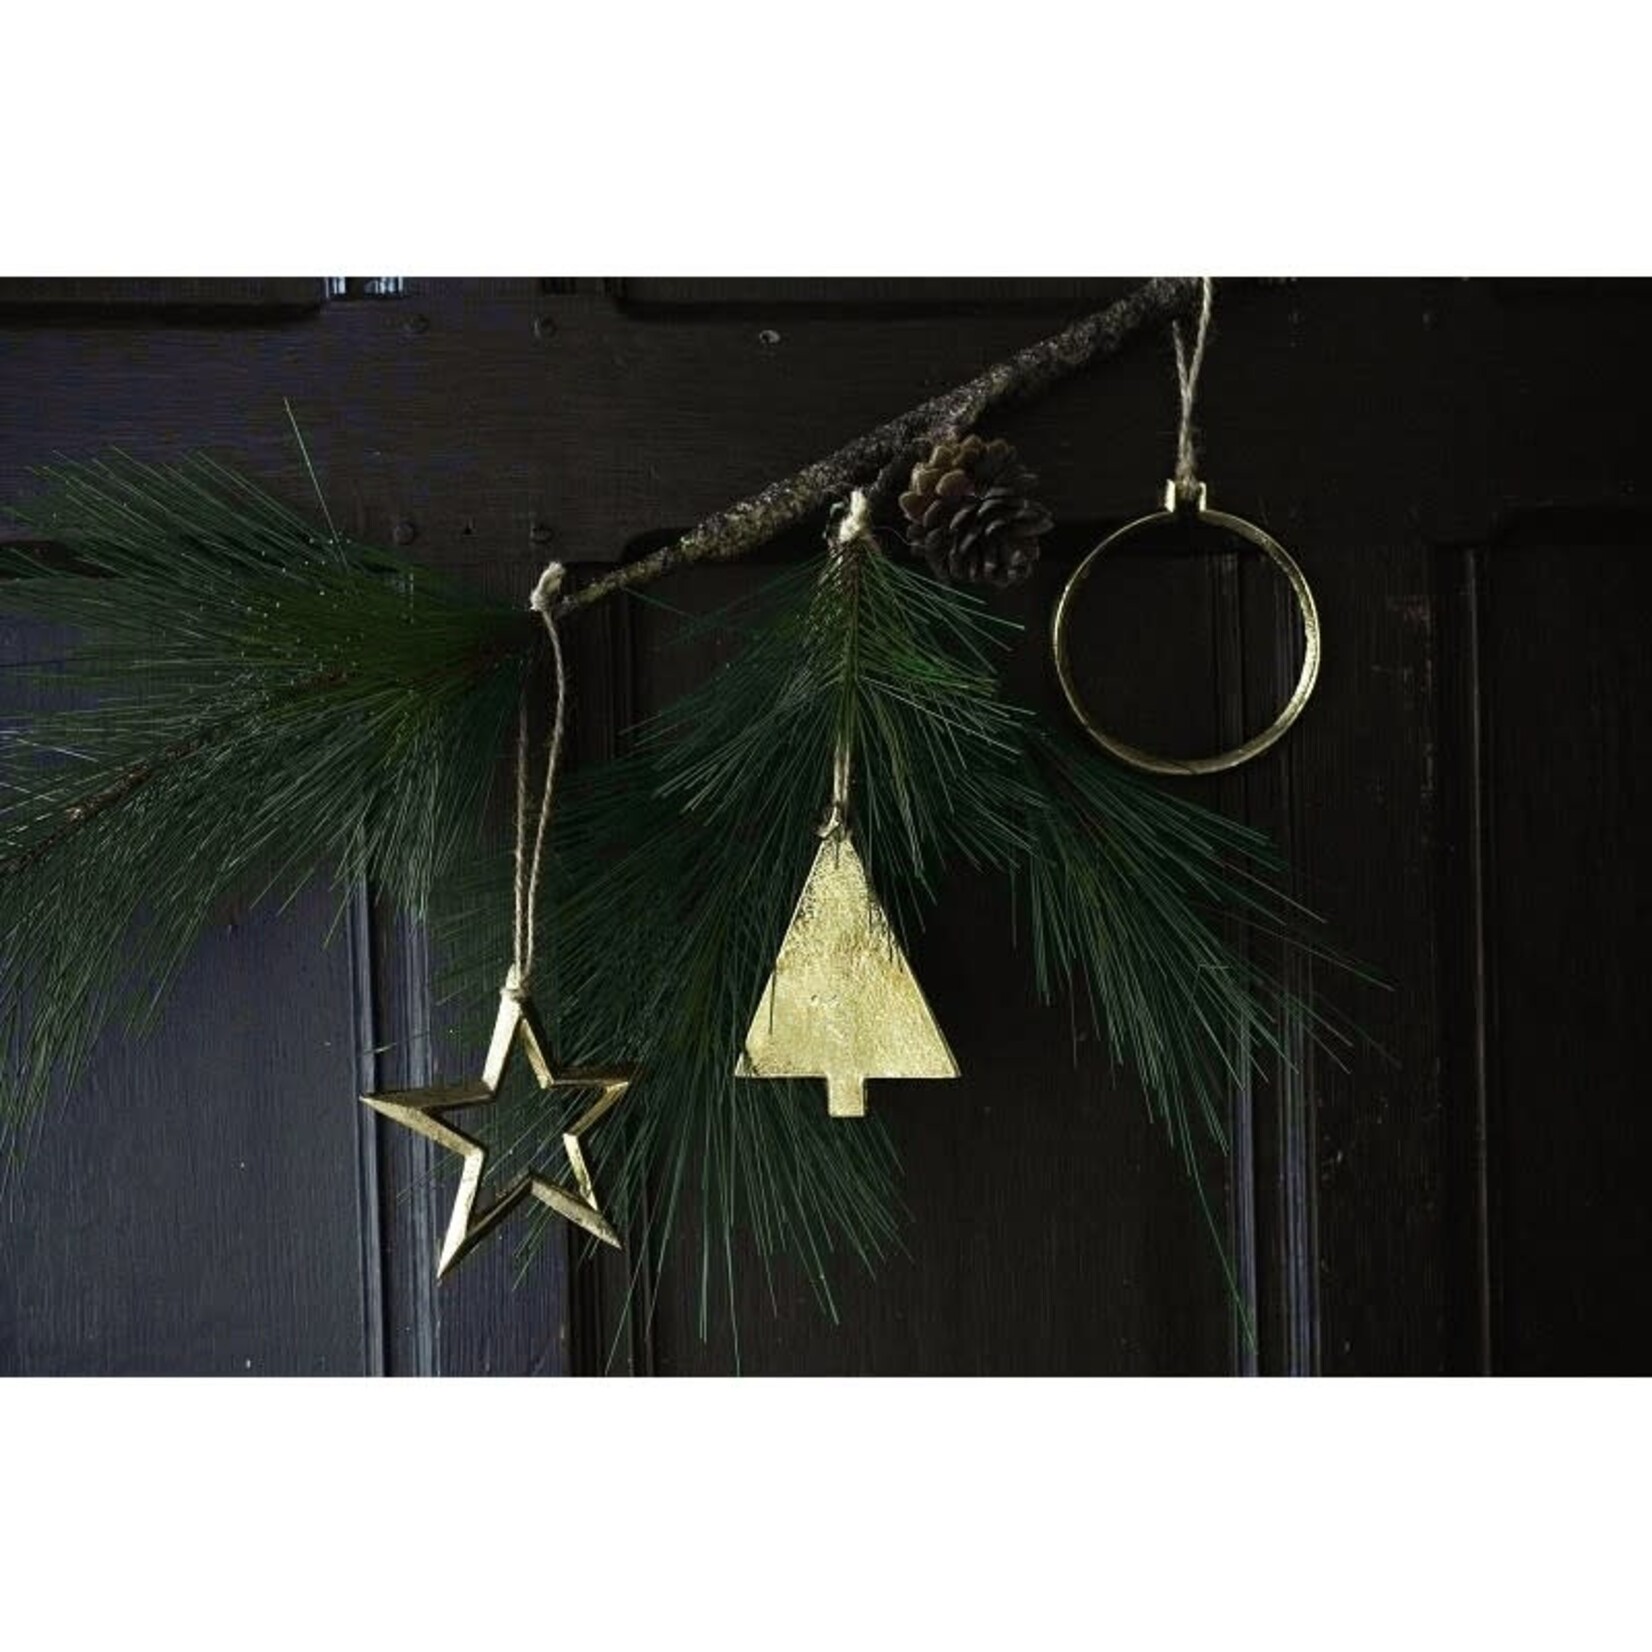 Home Society Ornament Nordic kerstboom